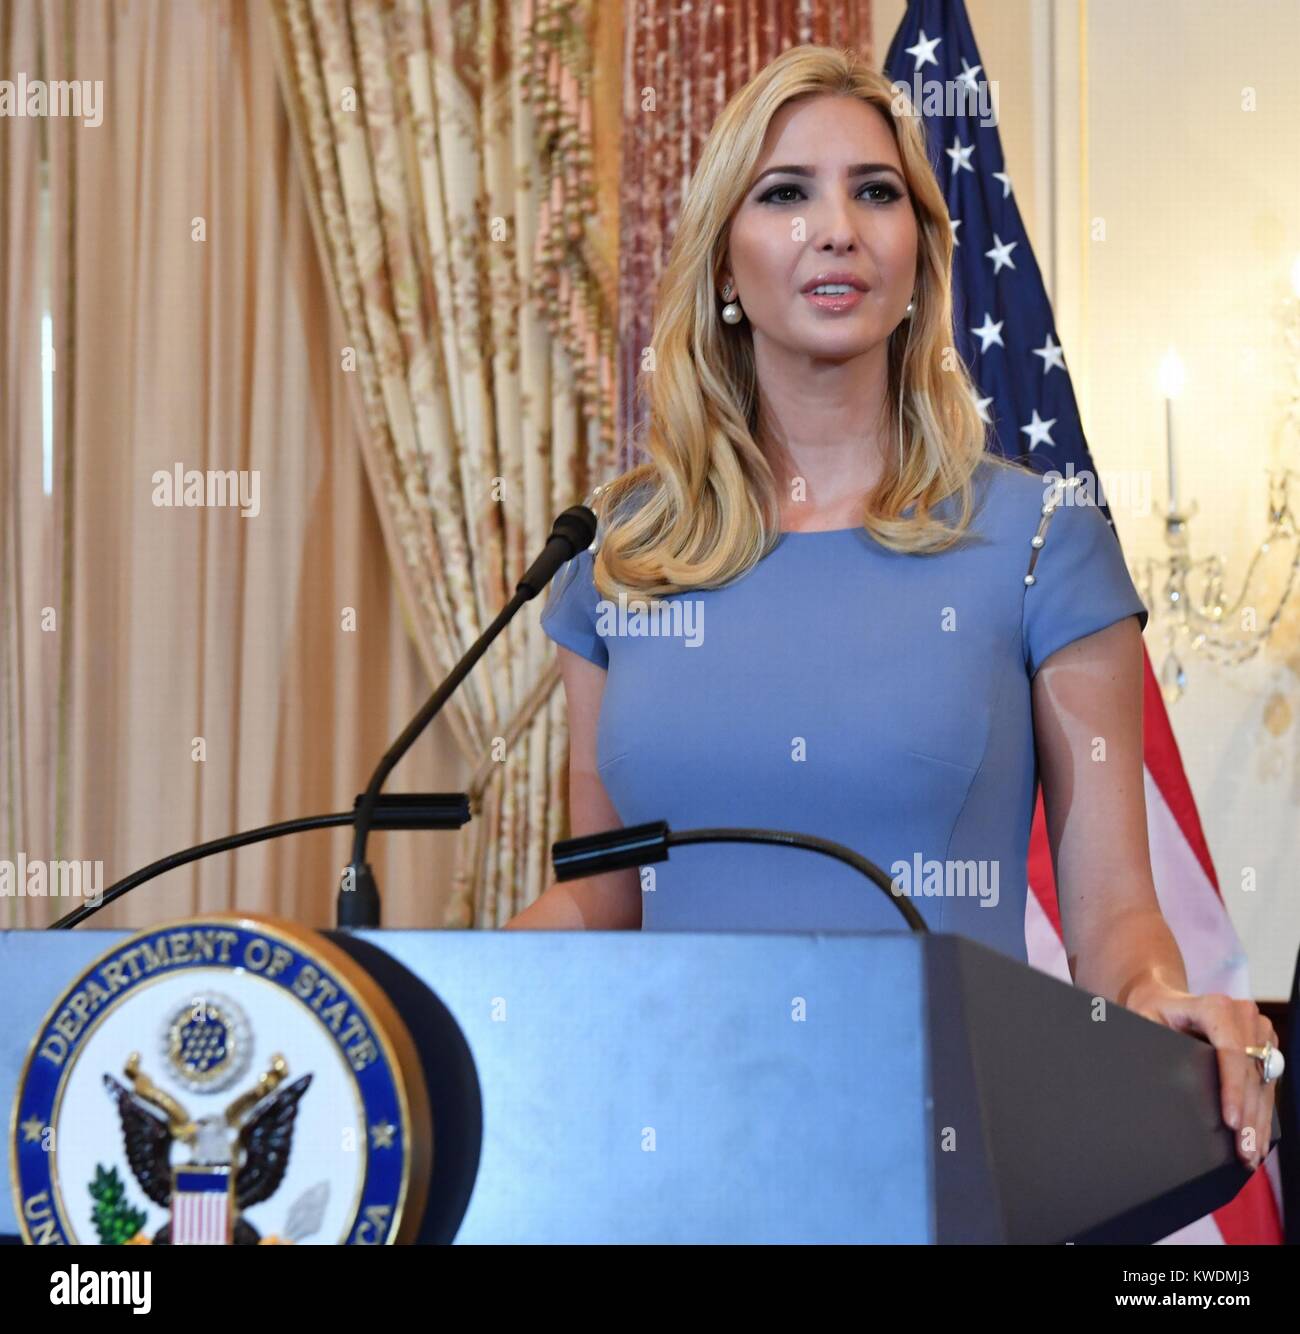 Ivanka Trump speaks at a US State Department ceremony, June 27, 2017. She and Sec. of State Tillerson, marked the 2017 Trafficking in Persons Report, required by the Trafficking Victims Protection Act. The Report assesses worldwide efforts to combat modern slavery (BSLOC 2017 19 8) Stock Photo